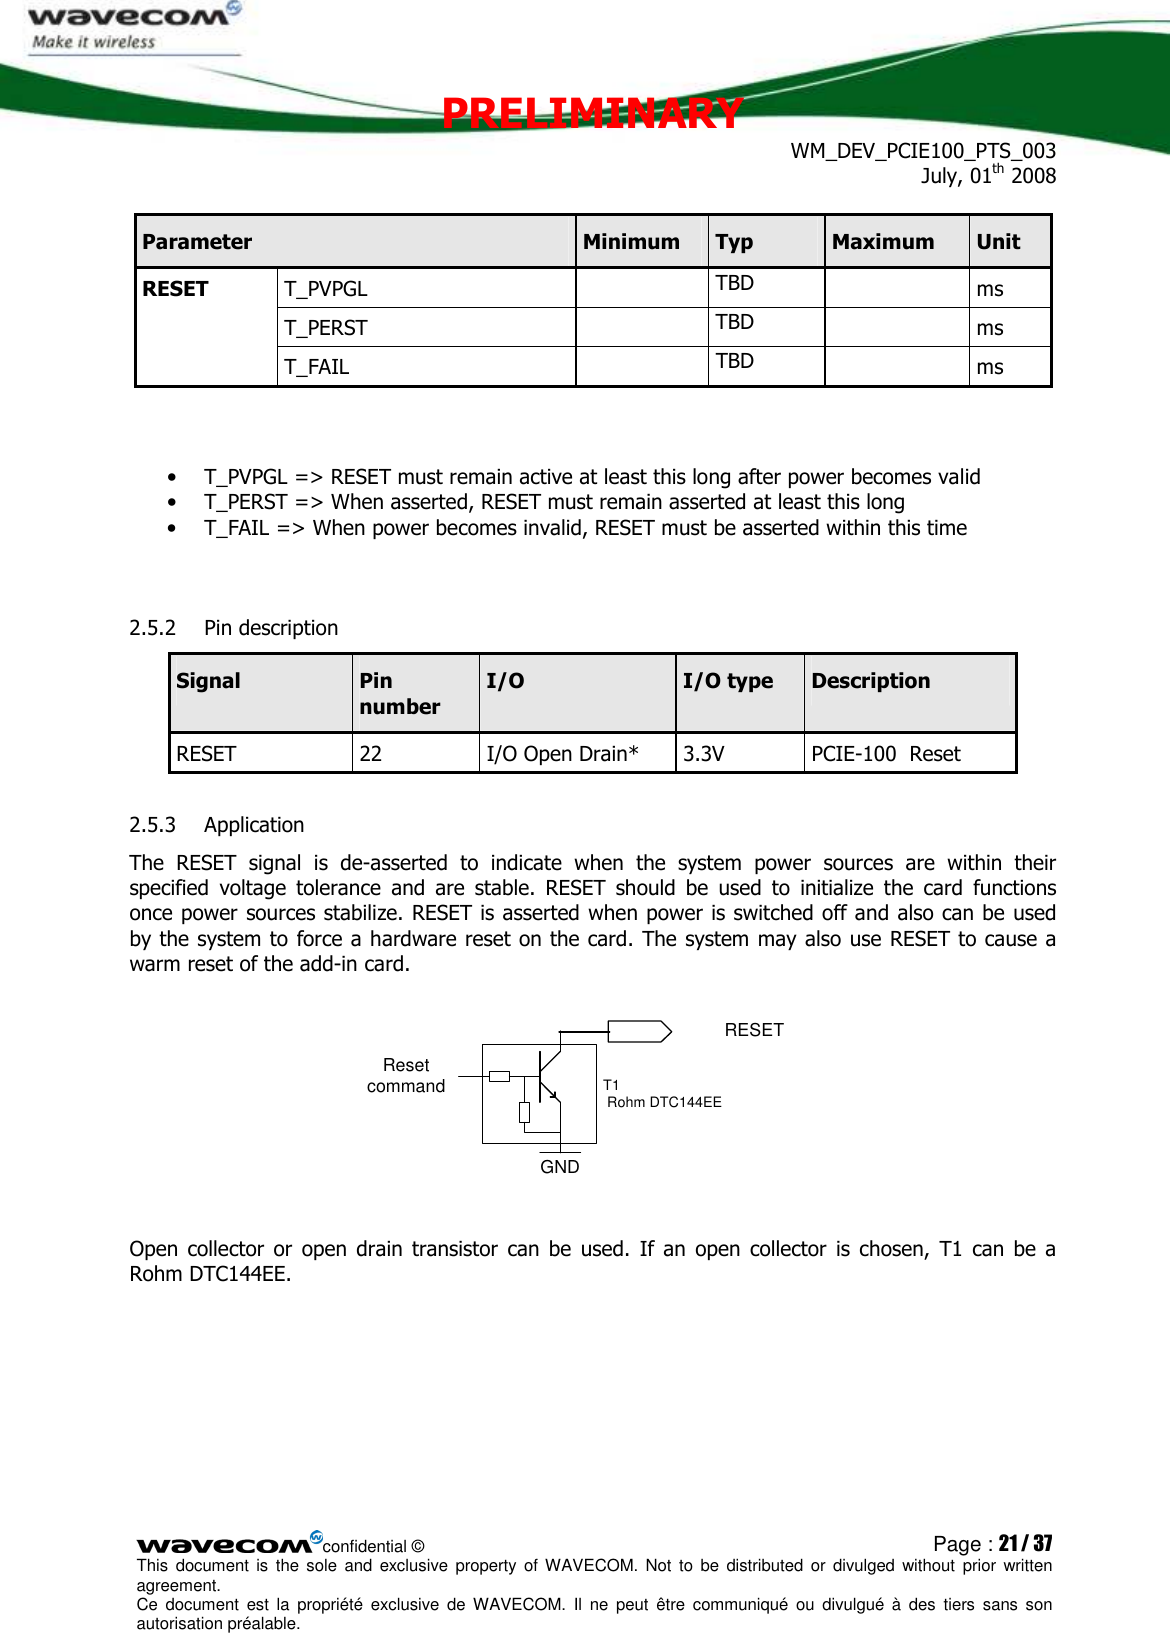 PRELIMINARY WM_DEV_PCIE100_PTS_003 July, 01th 2008  confidential © Page : 21 / 37 This  document  is  the  sole  and  exclusive property  of  WAVECOM.  Not  to  be  distributed  or  divulged  without  prior written agreement.  Ce  document  est  la  propriété  exclusive  de  WAVECOM.  Il  ne  peut  être  communiqué  ou  divulgué à  des  tiers  sans  son autorisation préalable.  Parameter  Minimum  Typ  Maximum  Unit T_PVPGL    TBD    ms T_PERST    TBD    ms RESET T_FAIL    TBD    ms   • T_PVPGL =&gt; RESET must remain active at least this long after power becomes valid • T_PERST =&gt; When asserted, RESET must remain asserted at least this long • T_FAIL =&gt; When power becomes invalid, RESET must be asserted within this time  2.5.2 Pin description Signal  Pin number I/O  I/O type  Description RESET  22  I/O Open Drain*   3.3V  PCIE-100  Reset 2.5.3 Application The  RESET  signal  is  de-asserted  to  indicate  when  the  system  power  sources  are  within  their specified  voltage  tolerance  and  are  stable.  RESET  should  be  used  to  initialize  the  card  functions once power sources stabilize. RESET is asserted when power is switched off and also can be used by the system to force a hardware reset on the card. The system may also use RESET to cause a warm reset of the add-in card.  GNDRESET Reset commandT1  Rohm DTC144EE  Open  collector  or  open  drain  transistor  can  be  used.  If  an  open  collector  is chosen,  T1  can  be  a Rohm DTC144EE.  